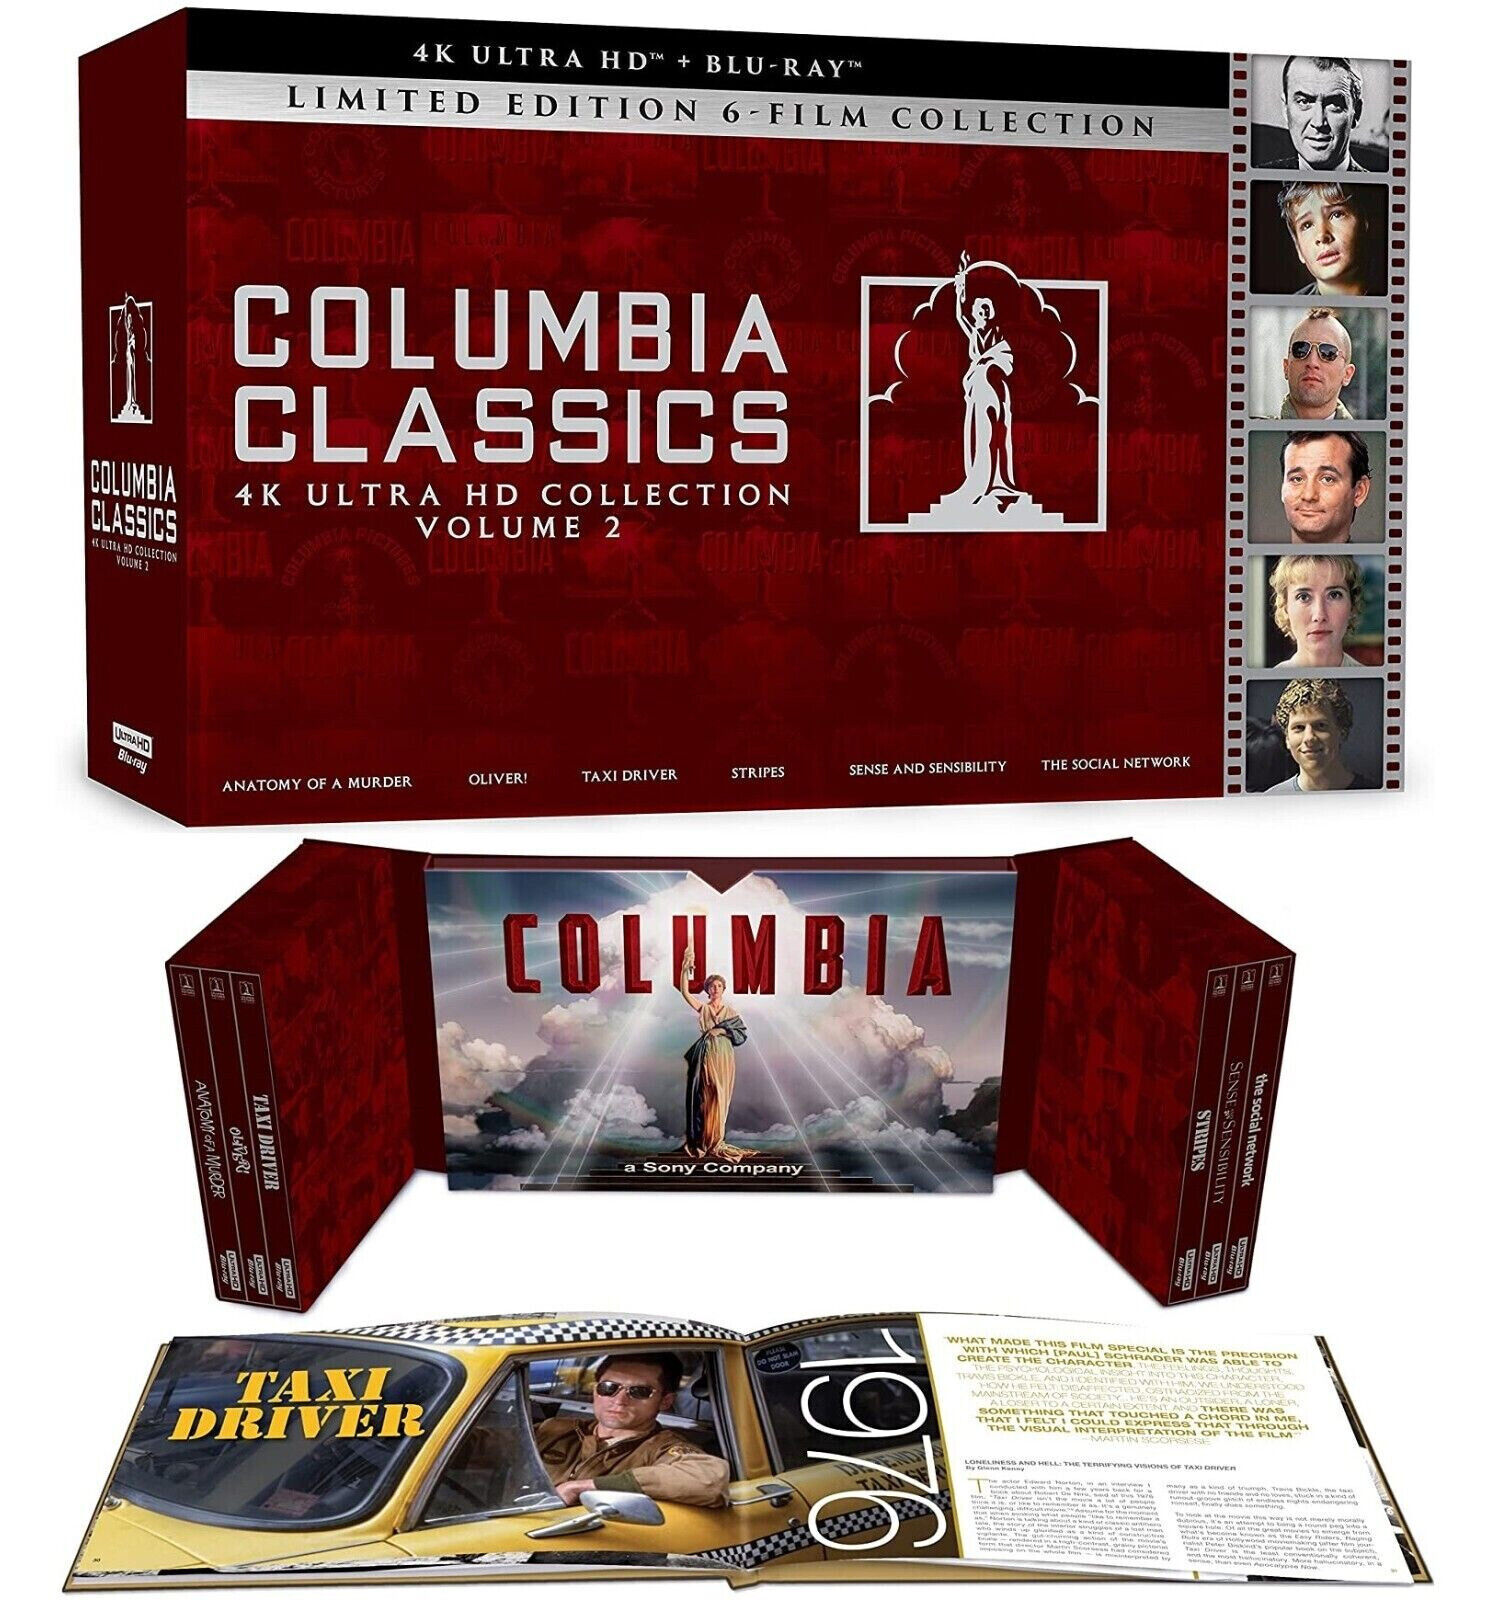 Columbia Classics Volume 2 Limited Edition 6 Film Collection [4K UHD + Blu-ray]